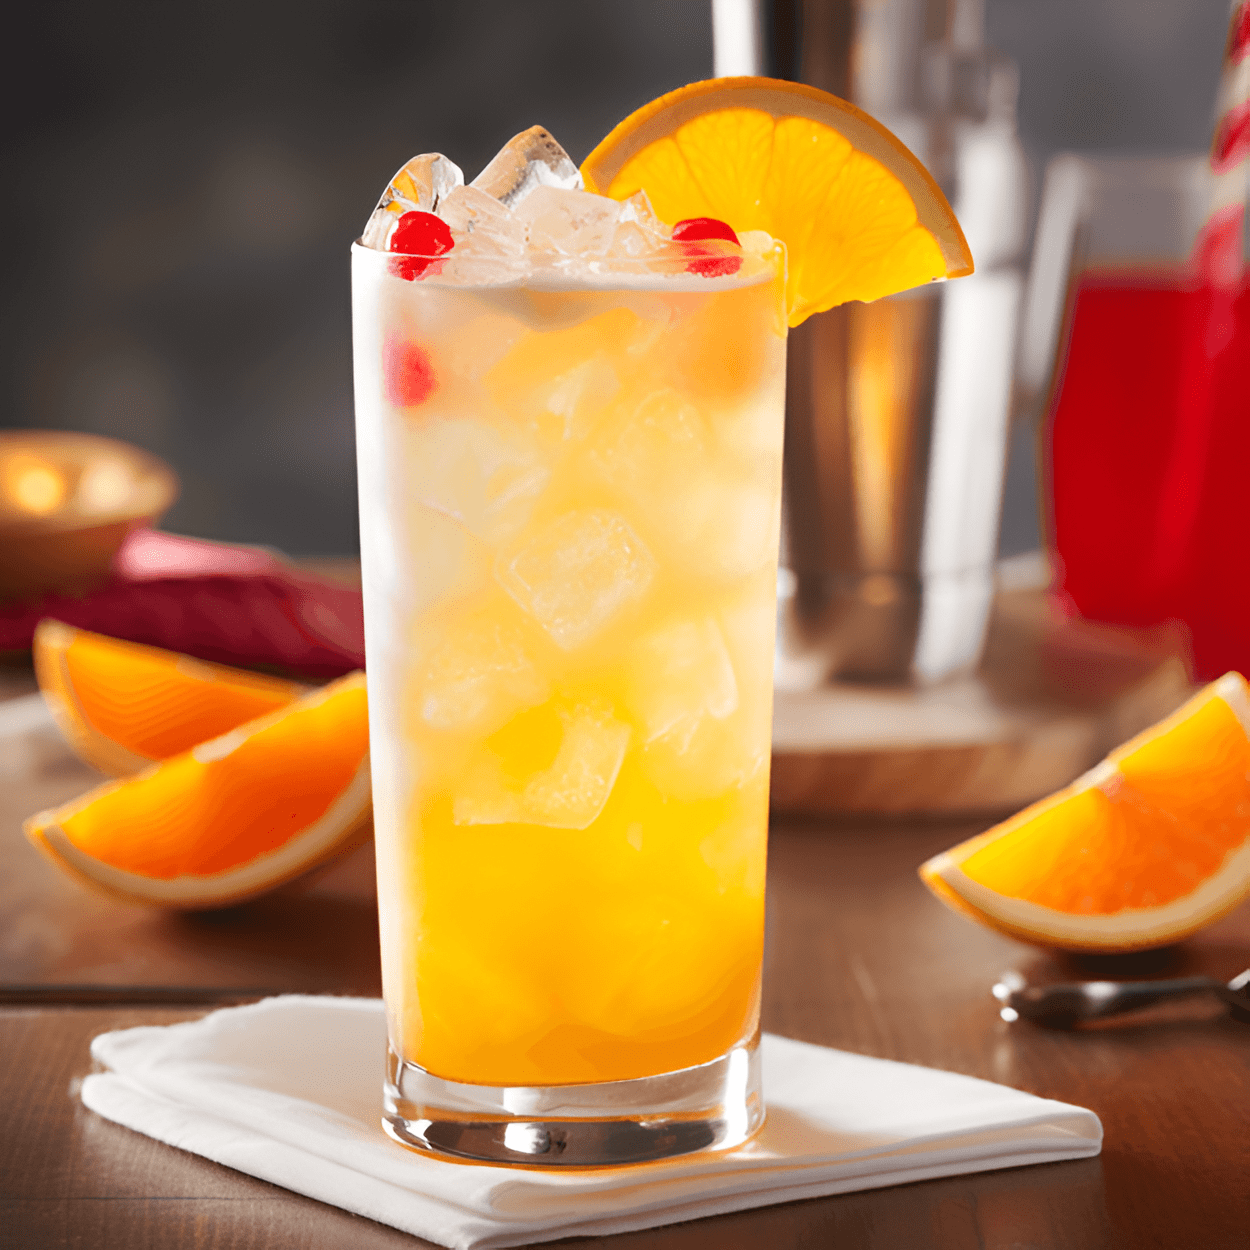 Sunny Screwdriver Cocktail Recipe - The Sunny Screwdriver has a sweet, citrusy taste with a slight tang from the vodka. The Sunny Delight adds a unique, fruity flavor that makes this cocktail incredibly refreshing and easy to drink.